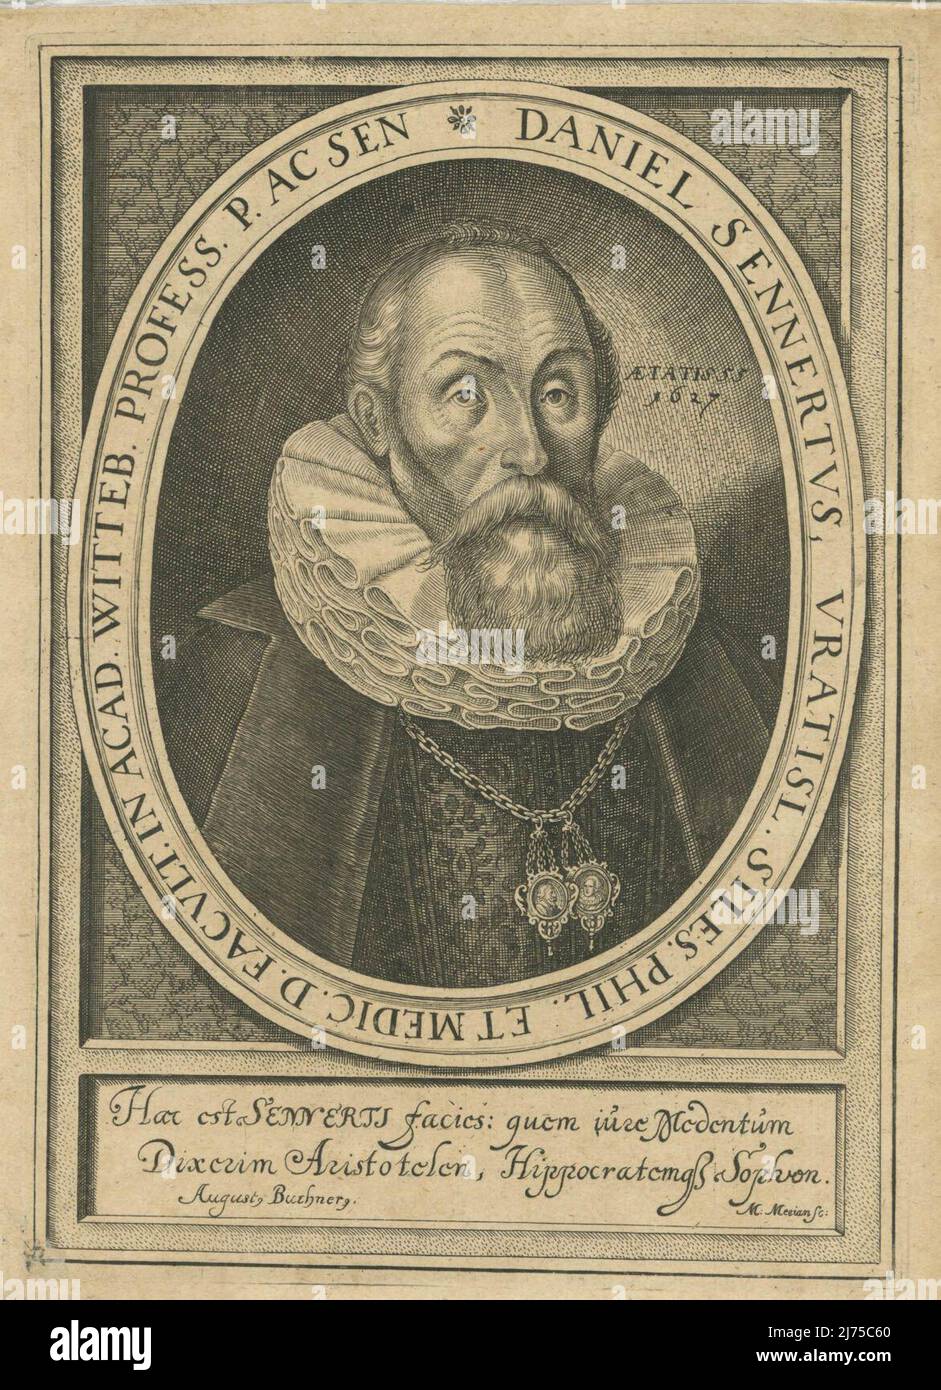 Daniel Sennert (25 November 1572 – 21 July 1637) was a renowned German physician and a prolific academic writer, especially in the field of alchemy or chemistry. He held the position of professor of medicine at the University of Wittenberg for many years. Stock Photo